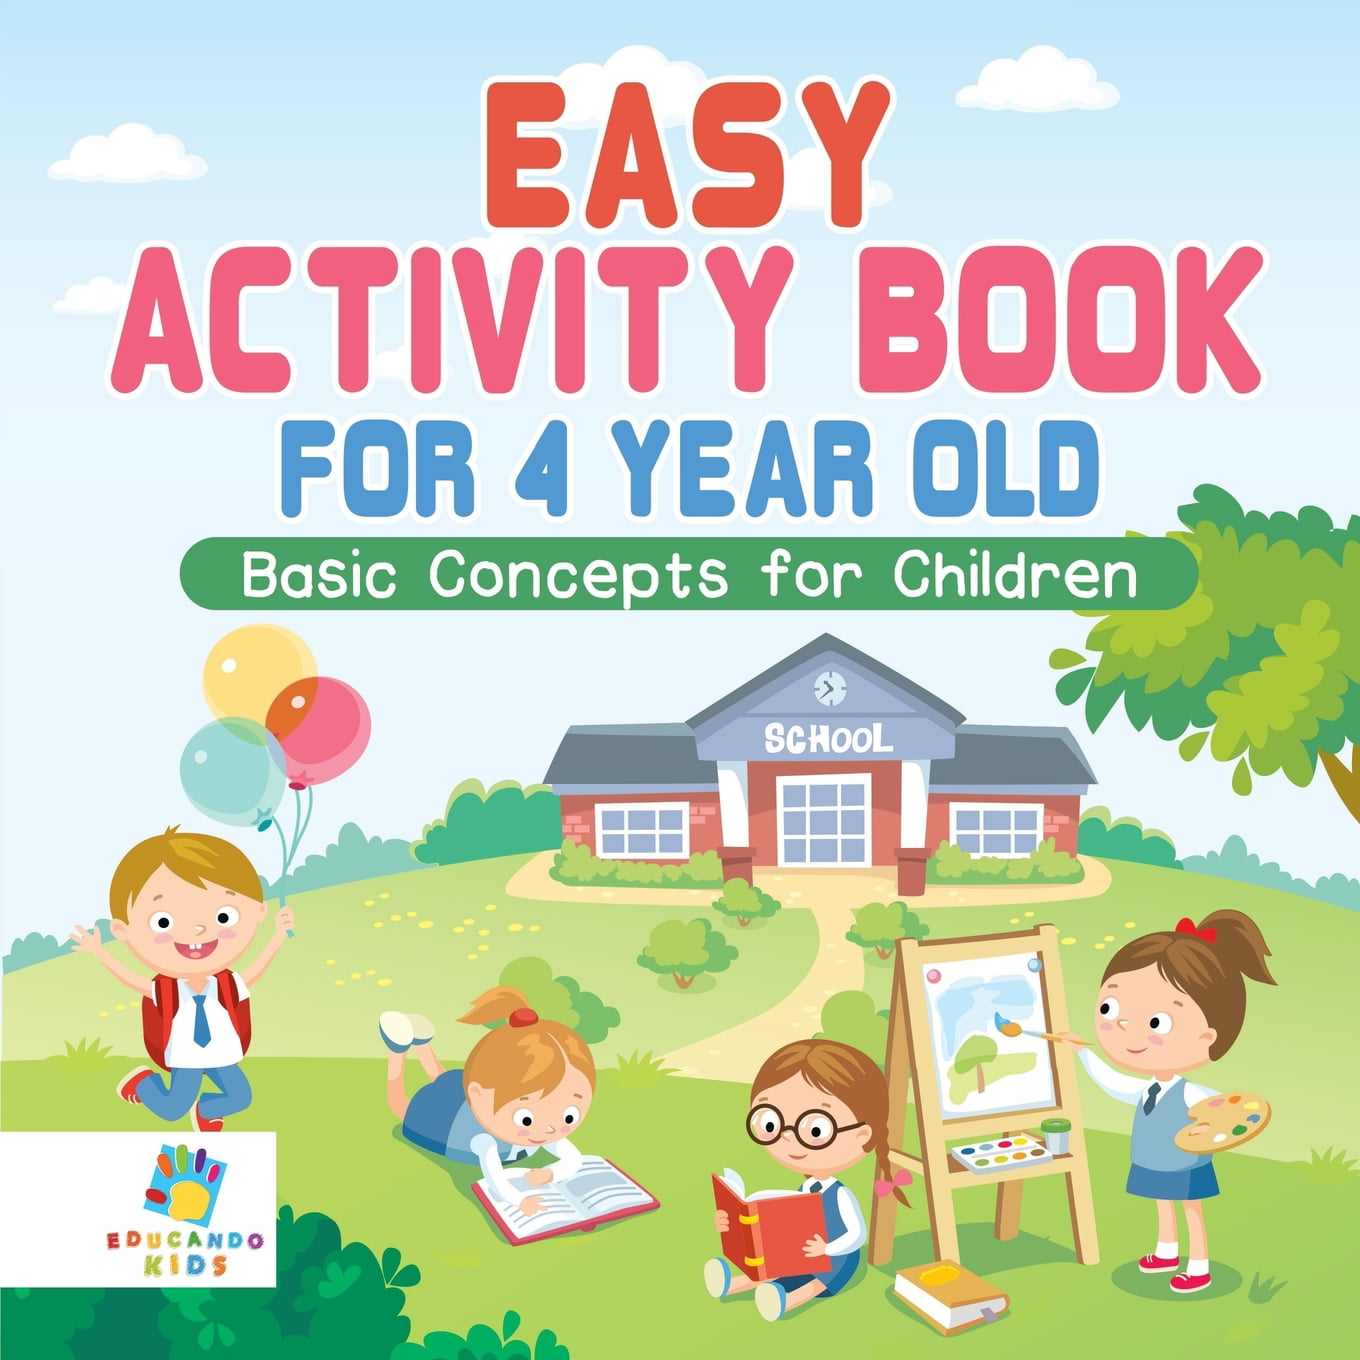 Basic activity. Easy book. Book idea for 4 year old. Children activity book from 2000.